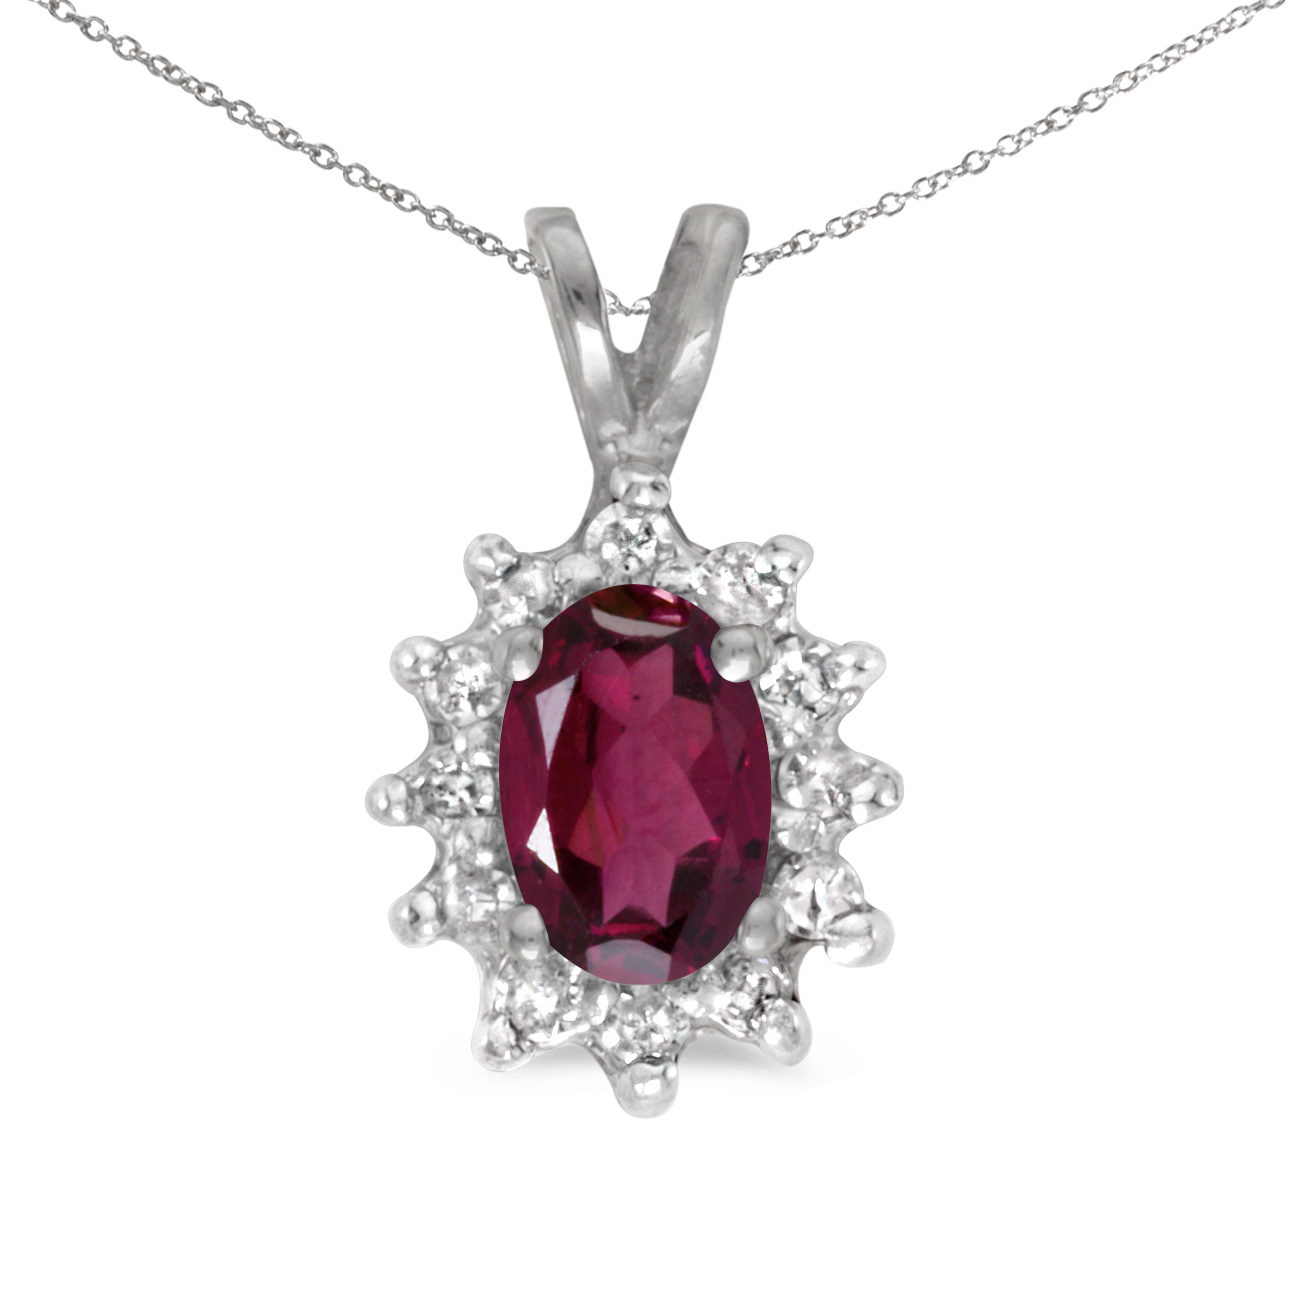 This 14k white gold oval rhodolite garnet and diamond pendant features a 6x4 mm genuine natural rhodolite garnet with a 0.49 ct total weight.